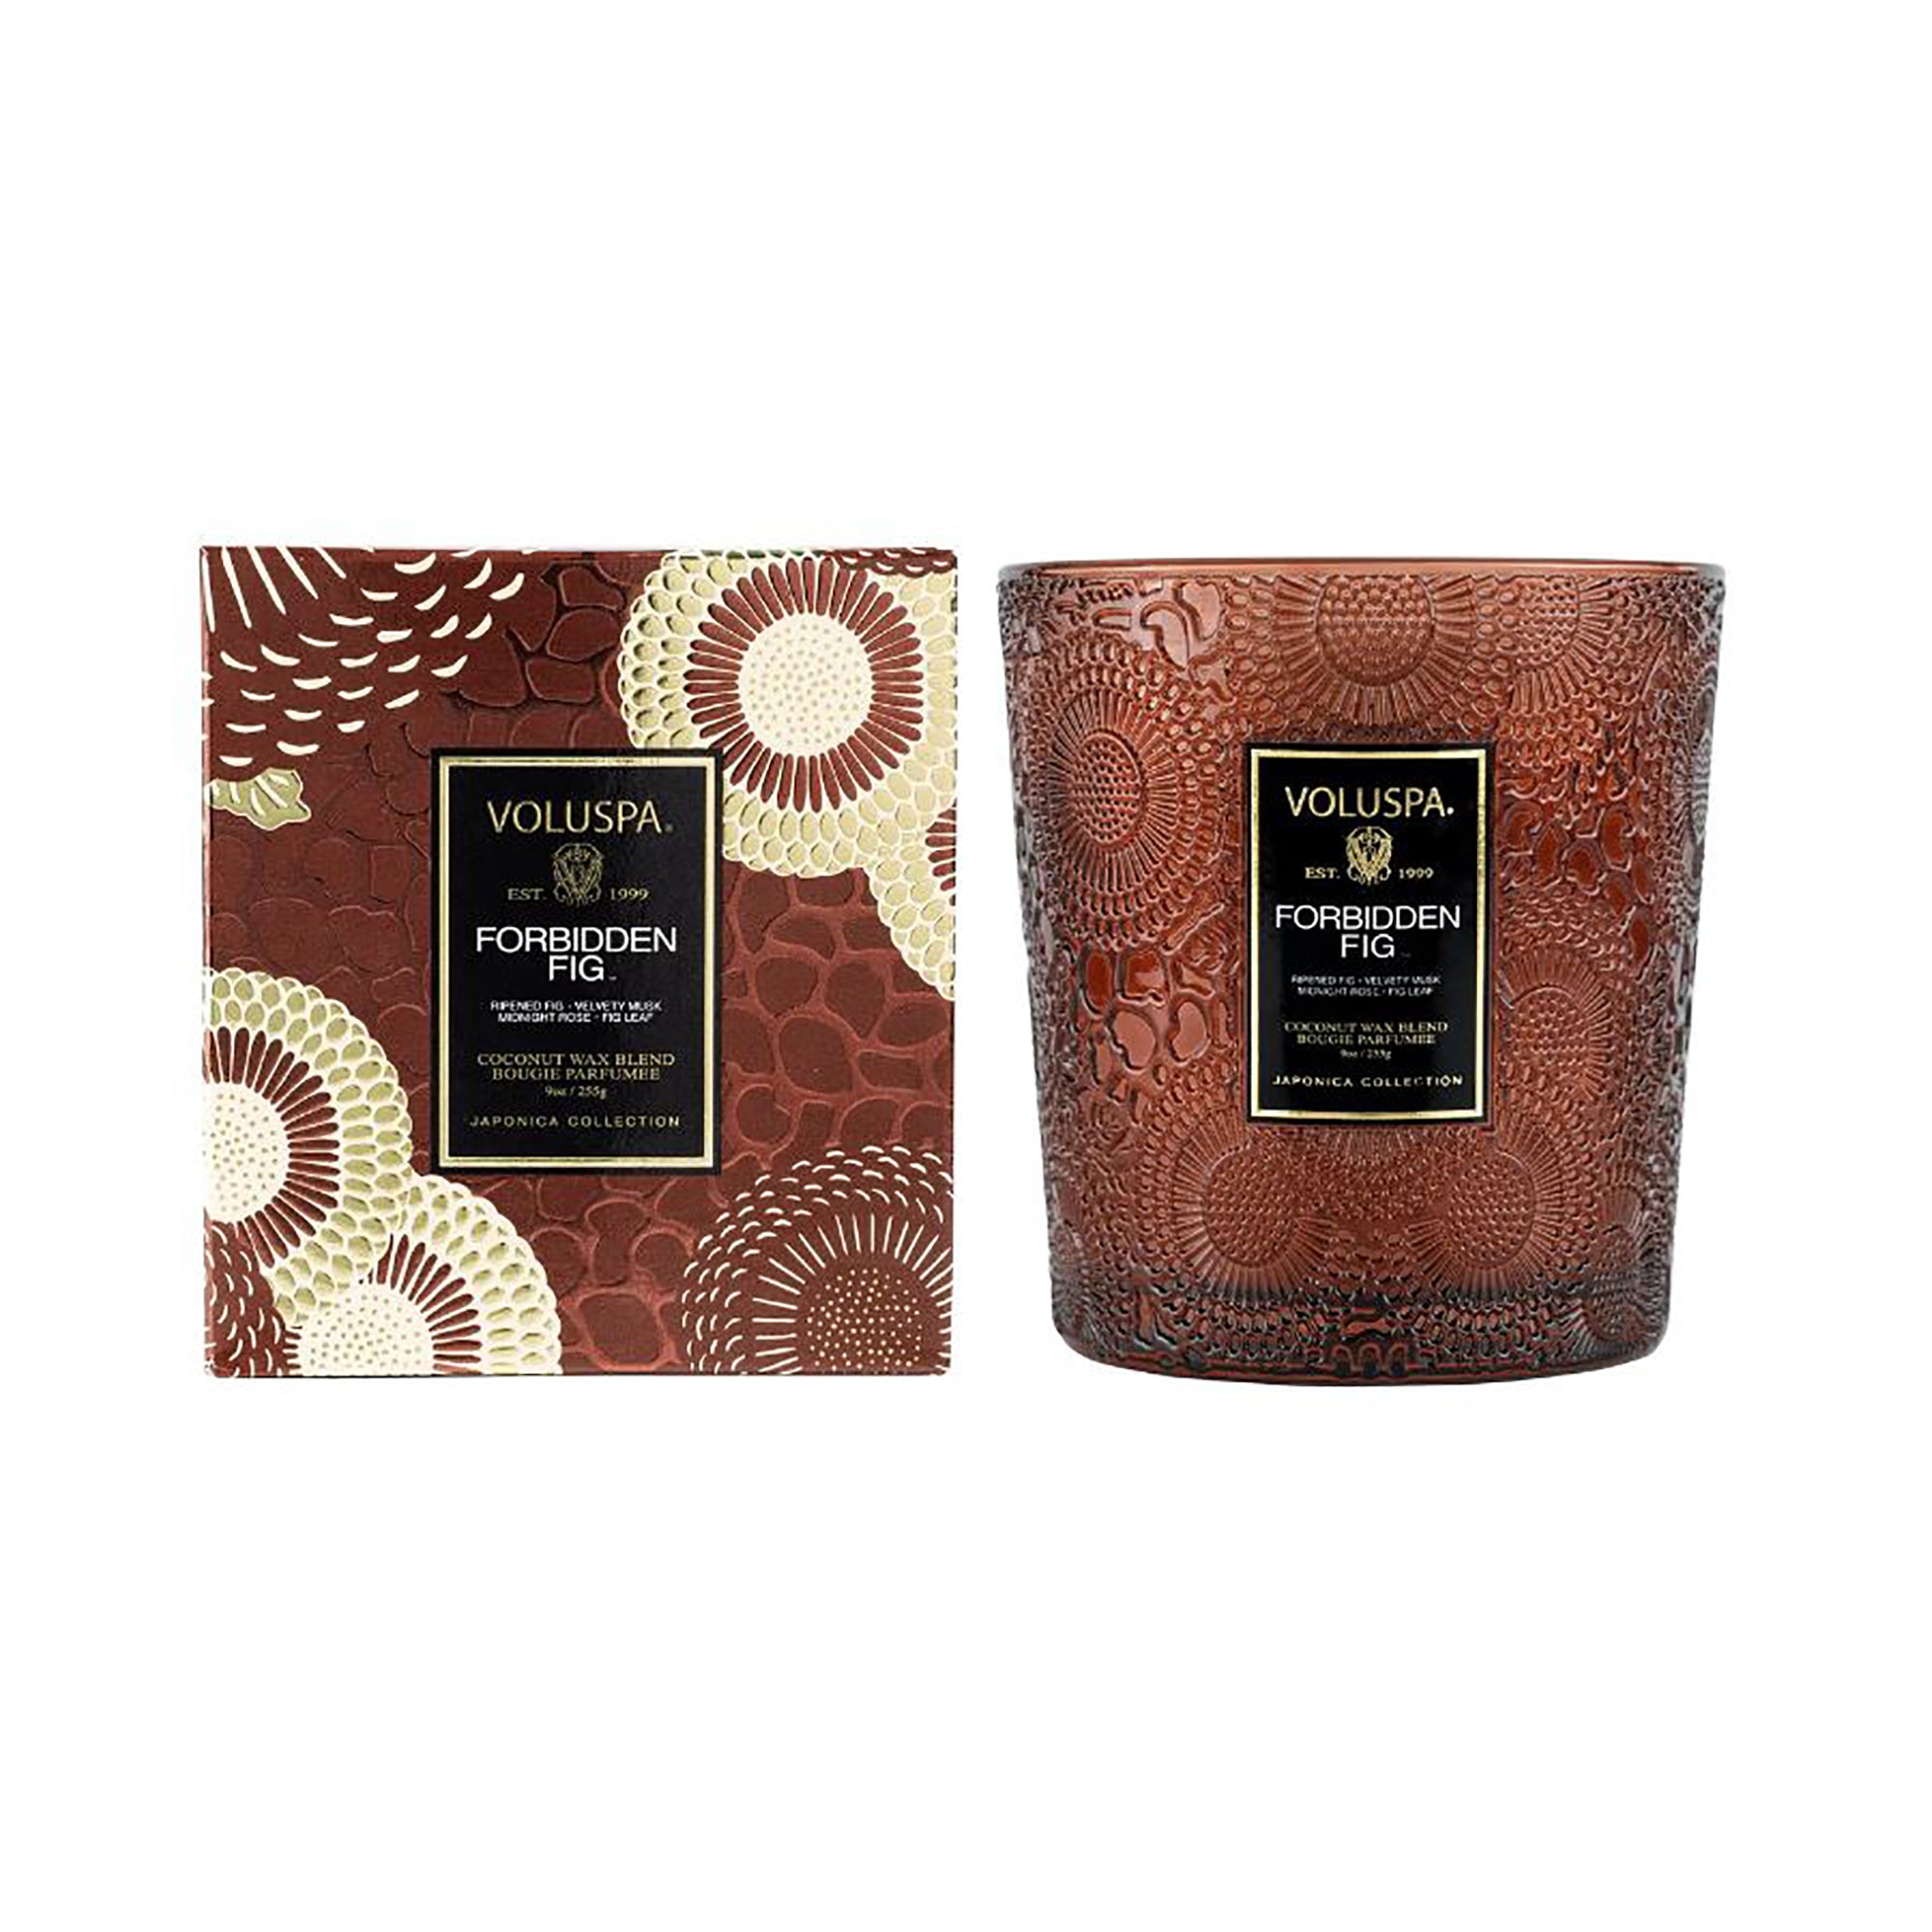 Voluspa Japonica Collection Boxed Classic Candle 9 oz. / FORBIDDEN FIG